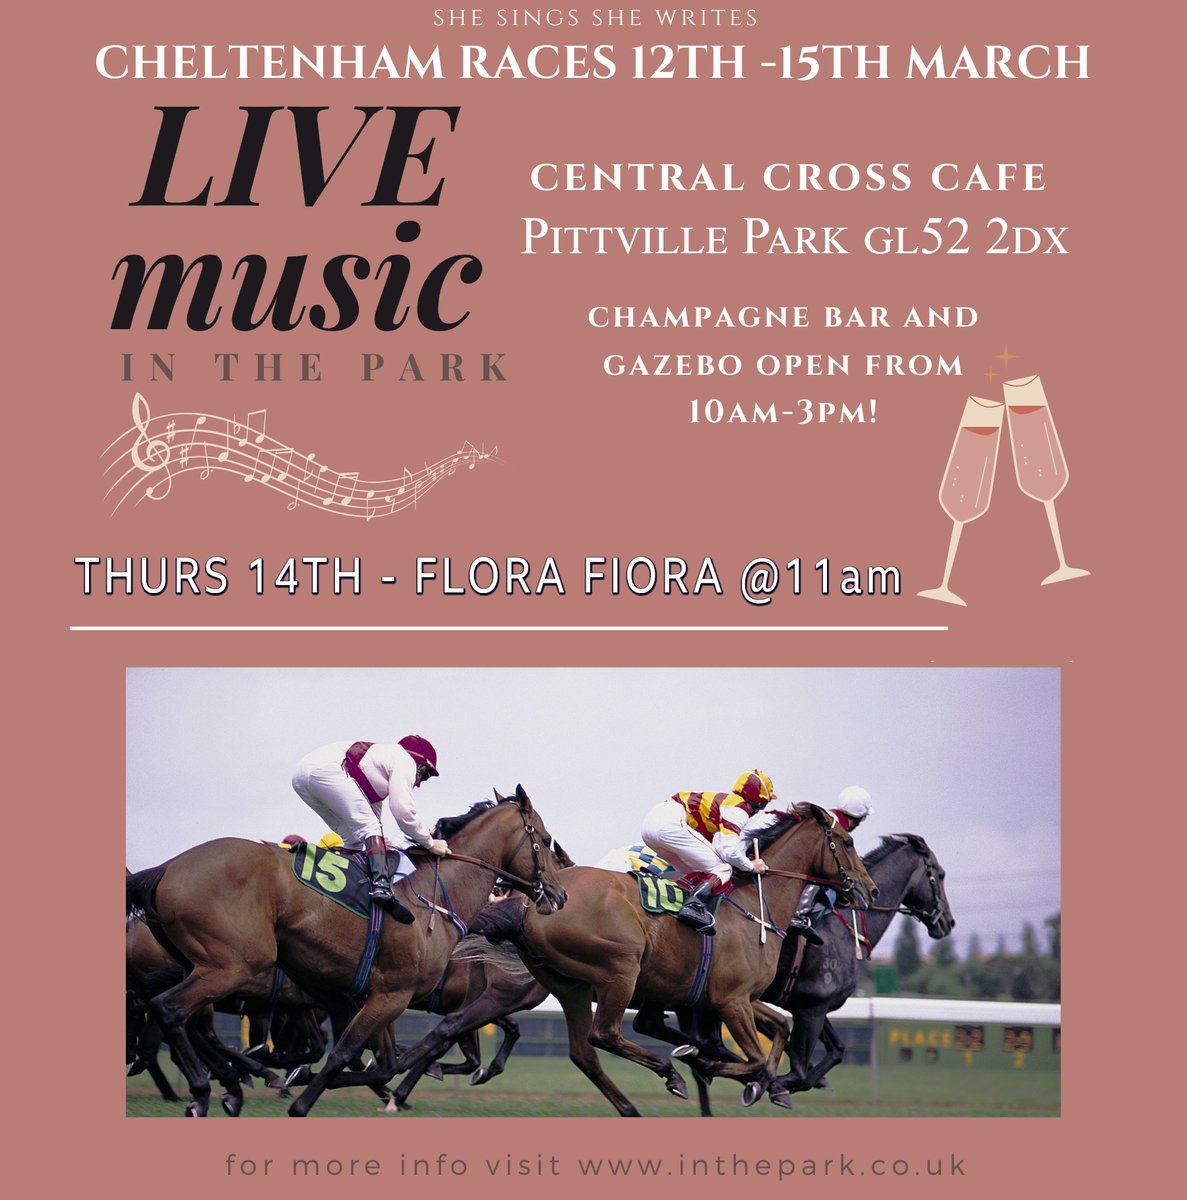 Tomorrow (14th March) I'll be performing at #CheltenhamRaces Central Cross Café #pittvillepark GL52 2DX between 11am & 1pm, in their champagne bar! Some of my T-shirts will be available to buy! @CheltenhamRaces